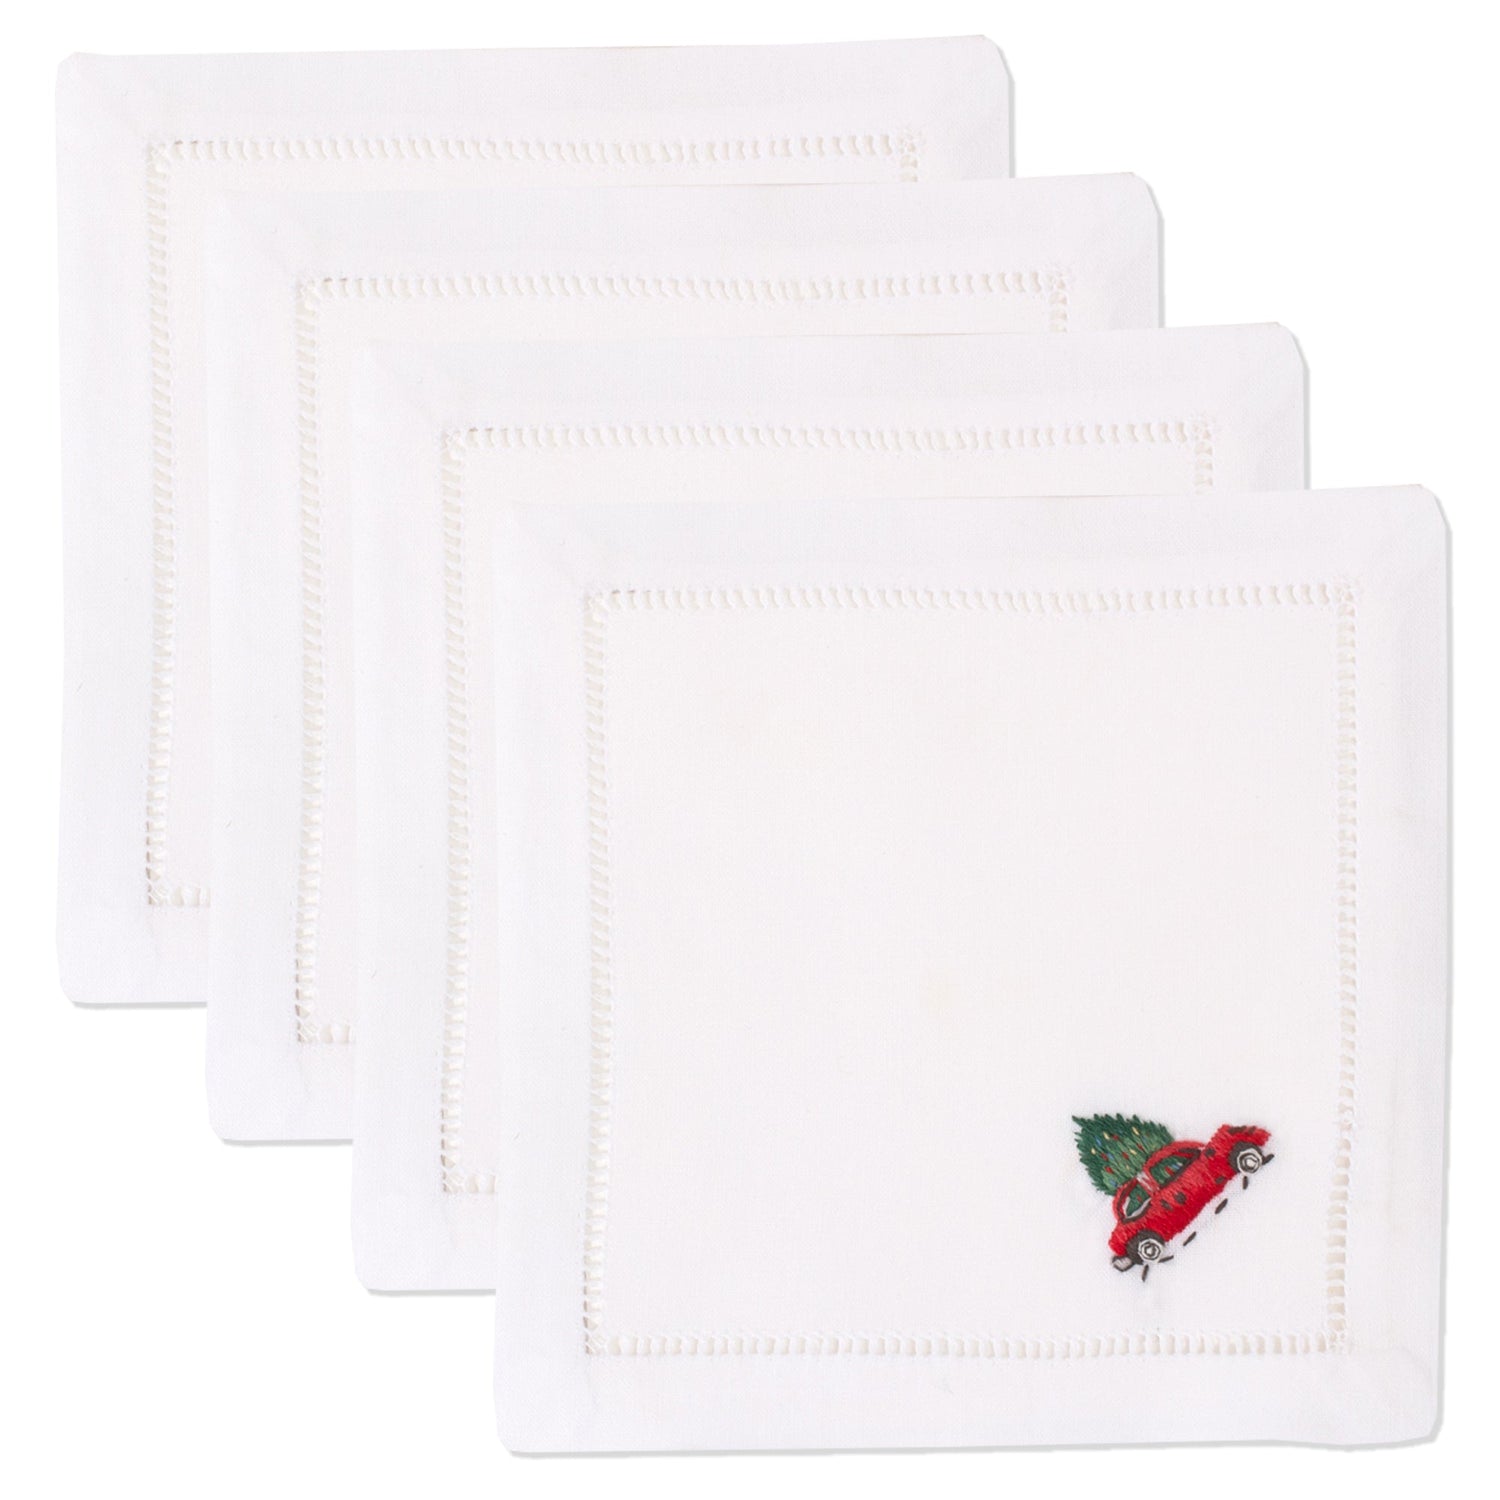 4 white cocktail napkins. Embroidered in the bottom right corner of each is a red car with a christmas tree tied on top.